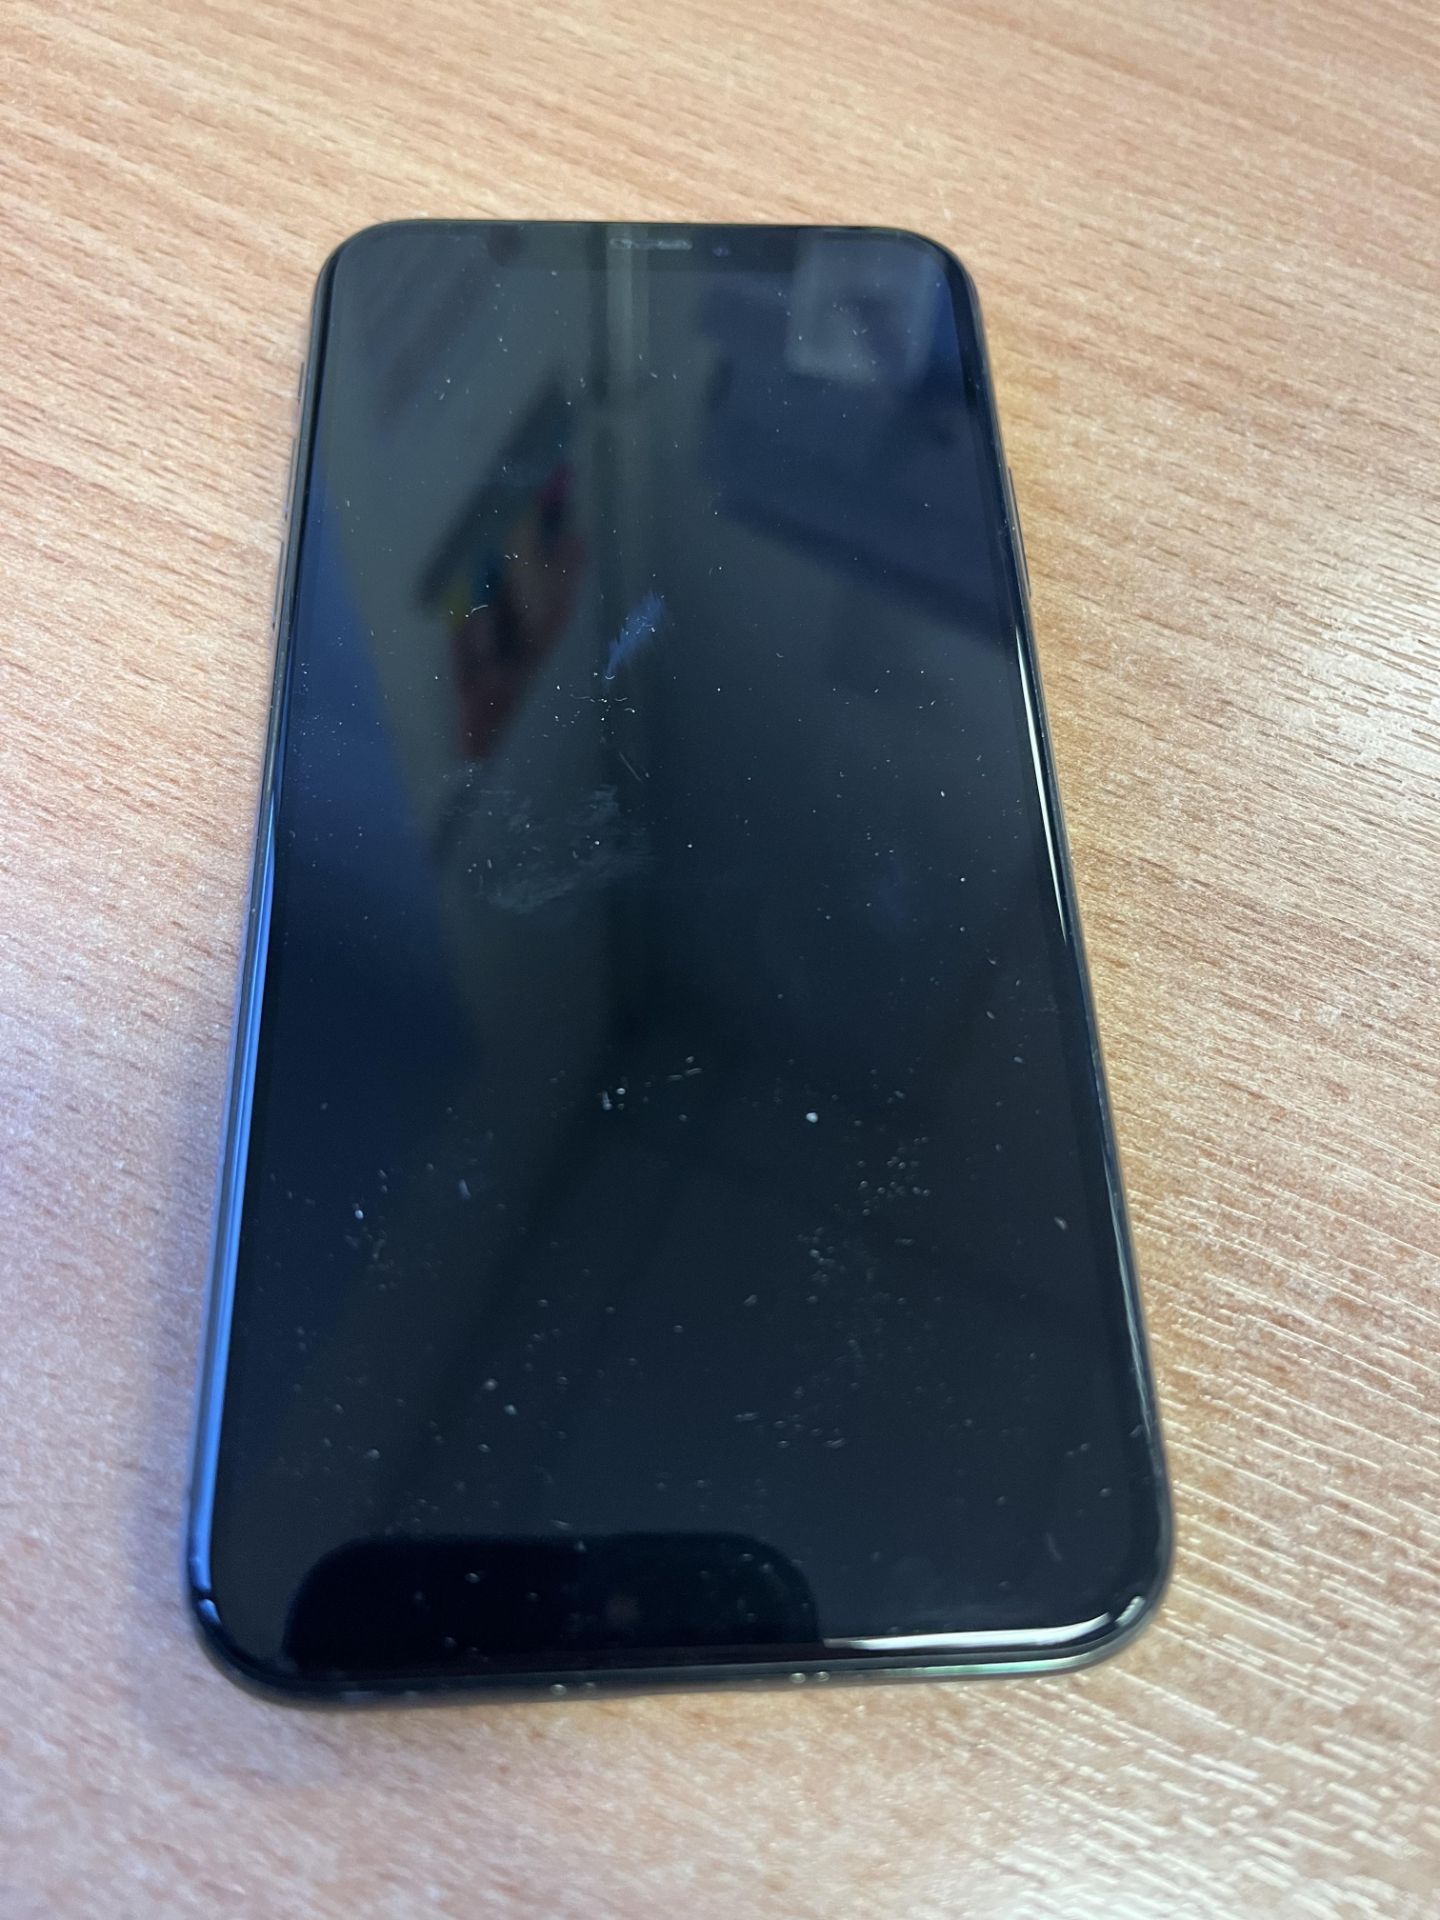 2x iPhone X's. No chargers, unknown condition. - Image 2 of 4